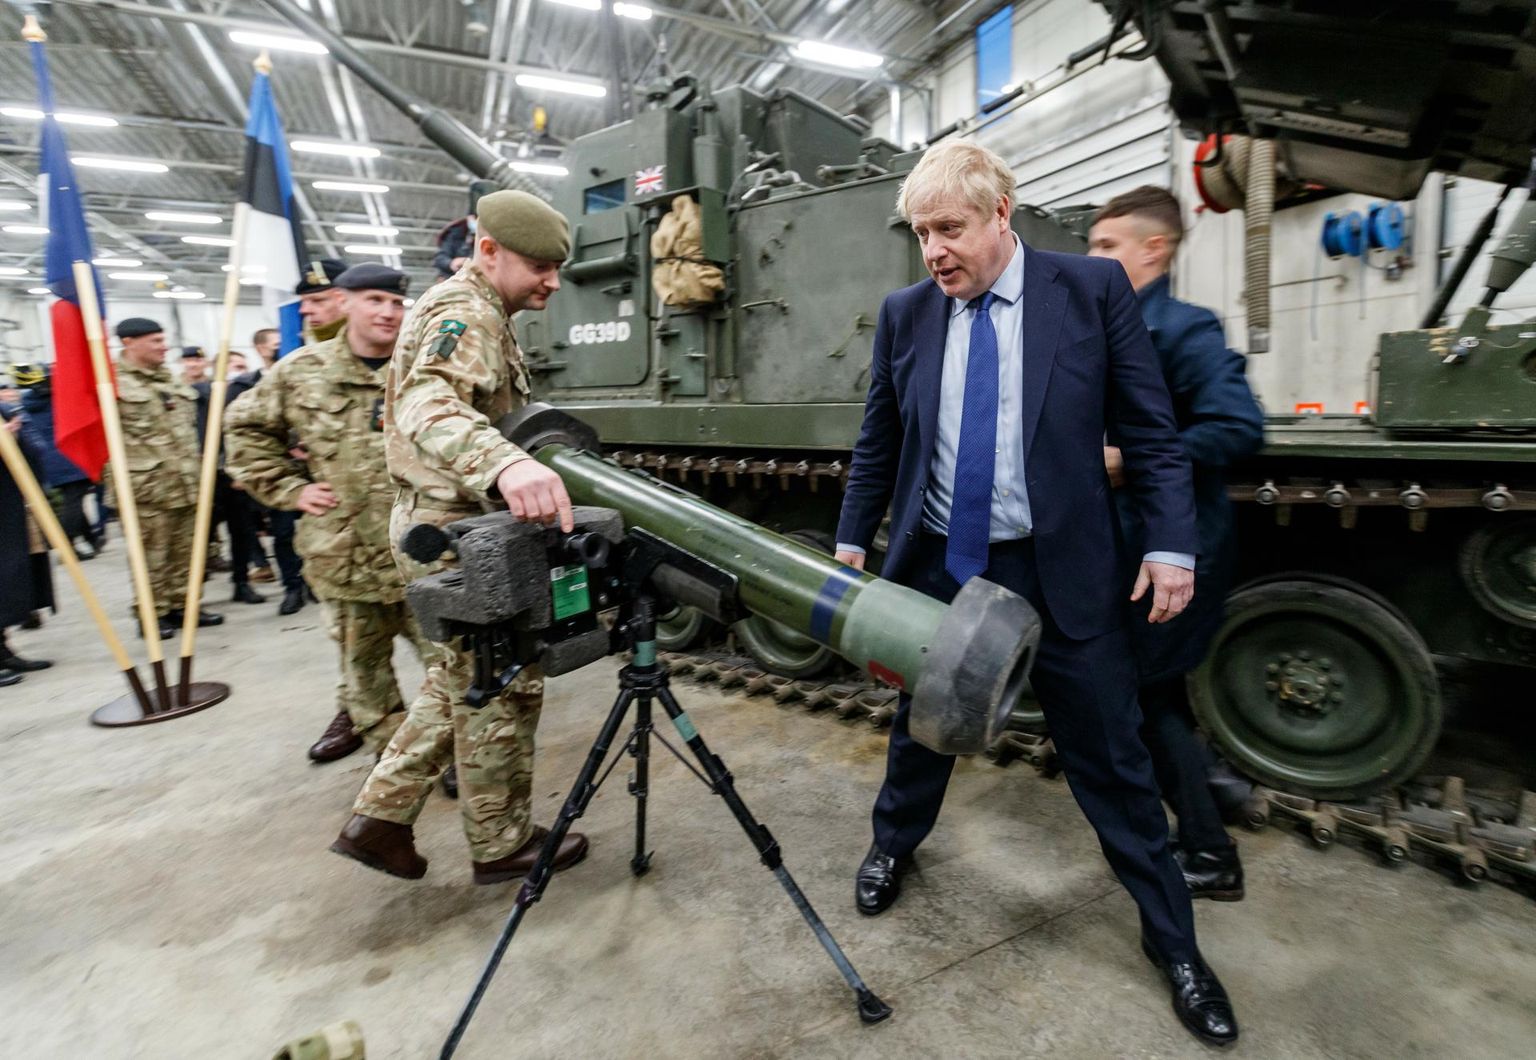 During Boris Johnson's tenure, there was talk of the hope of permanently bringing 2,000 British soldiers to Estonia. The reality is not quite so bold.